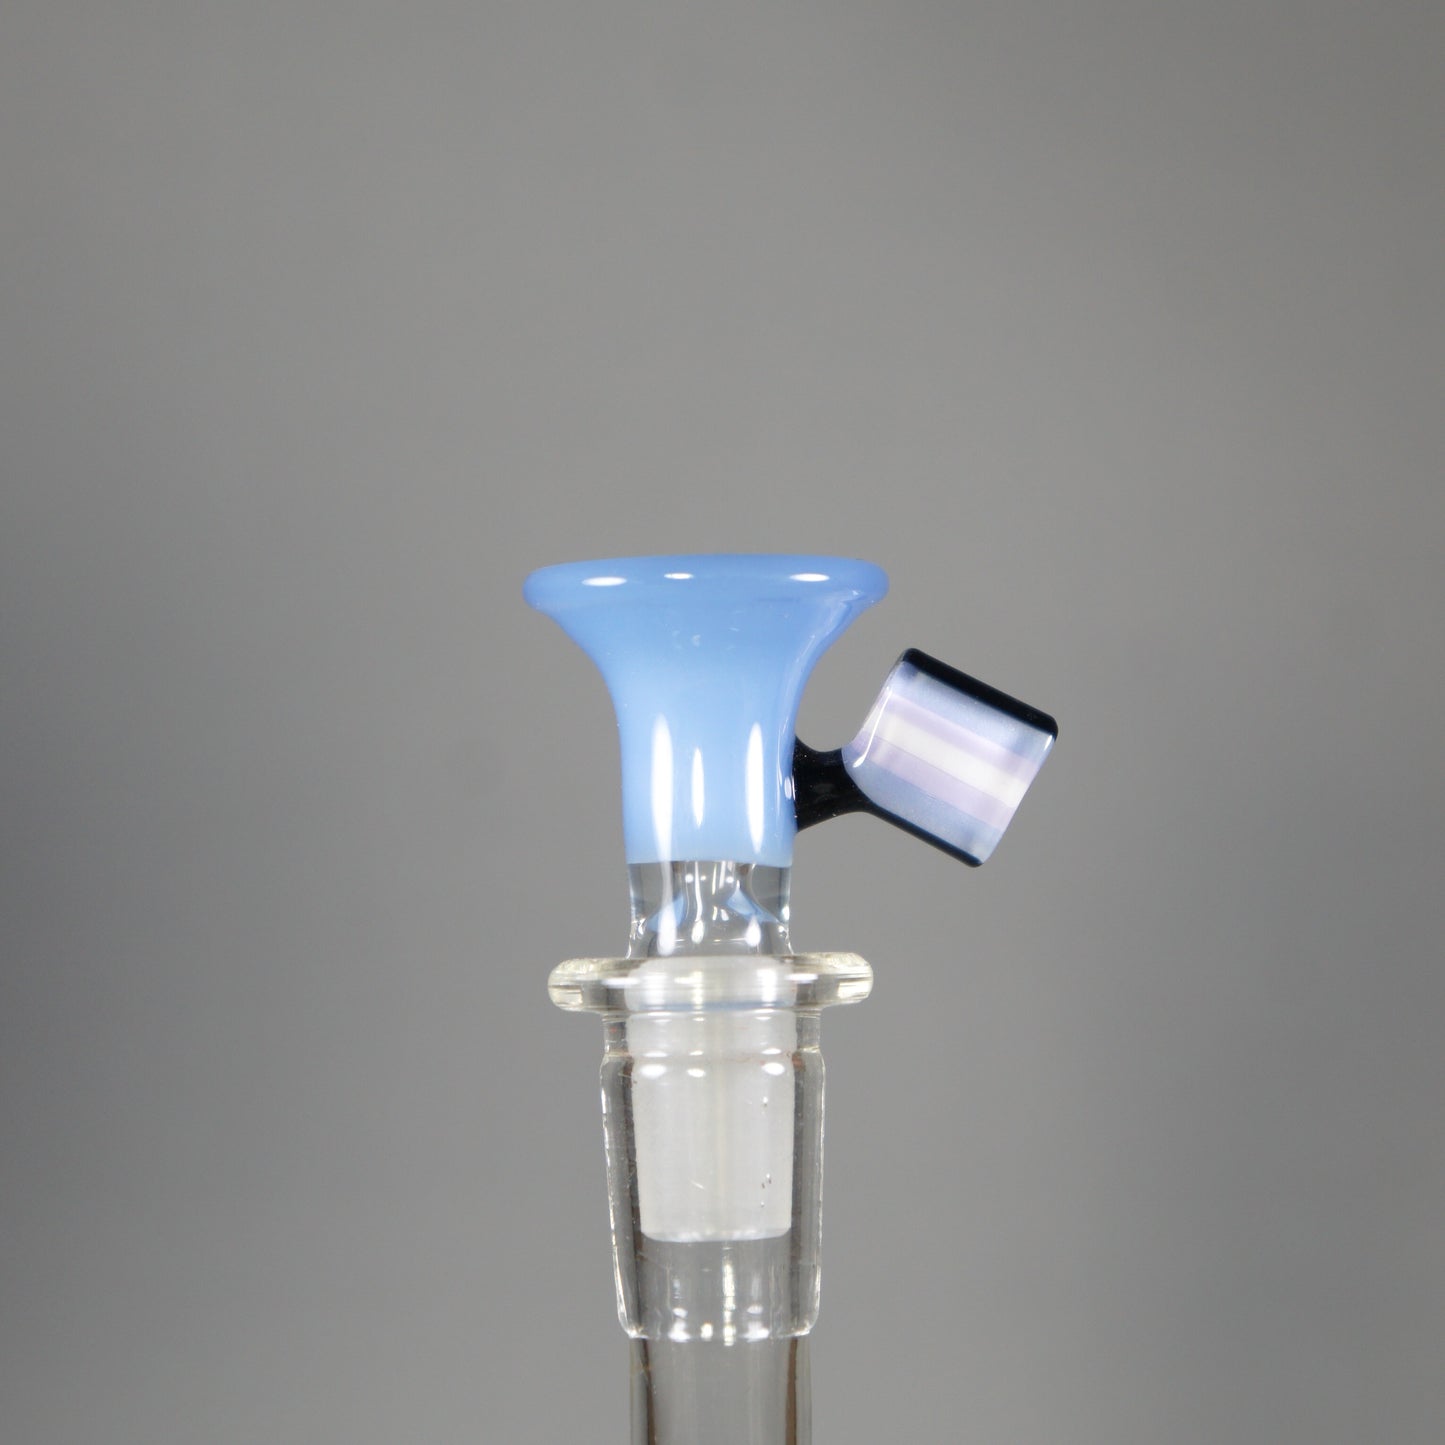 Verre d'intention - Diapositive Chipstack 14 mm - 1